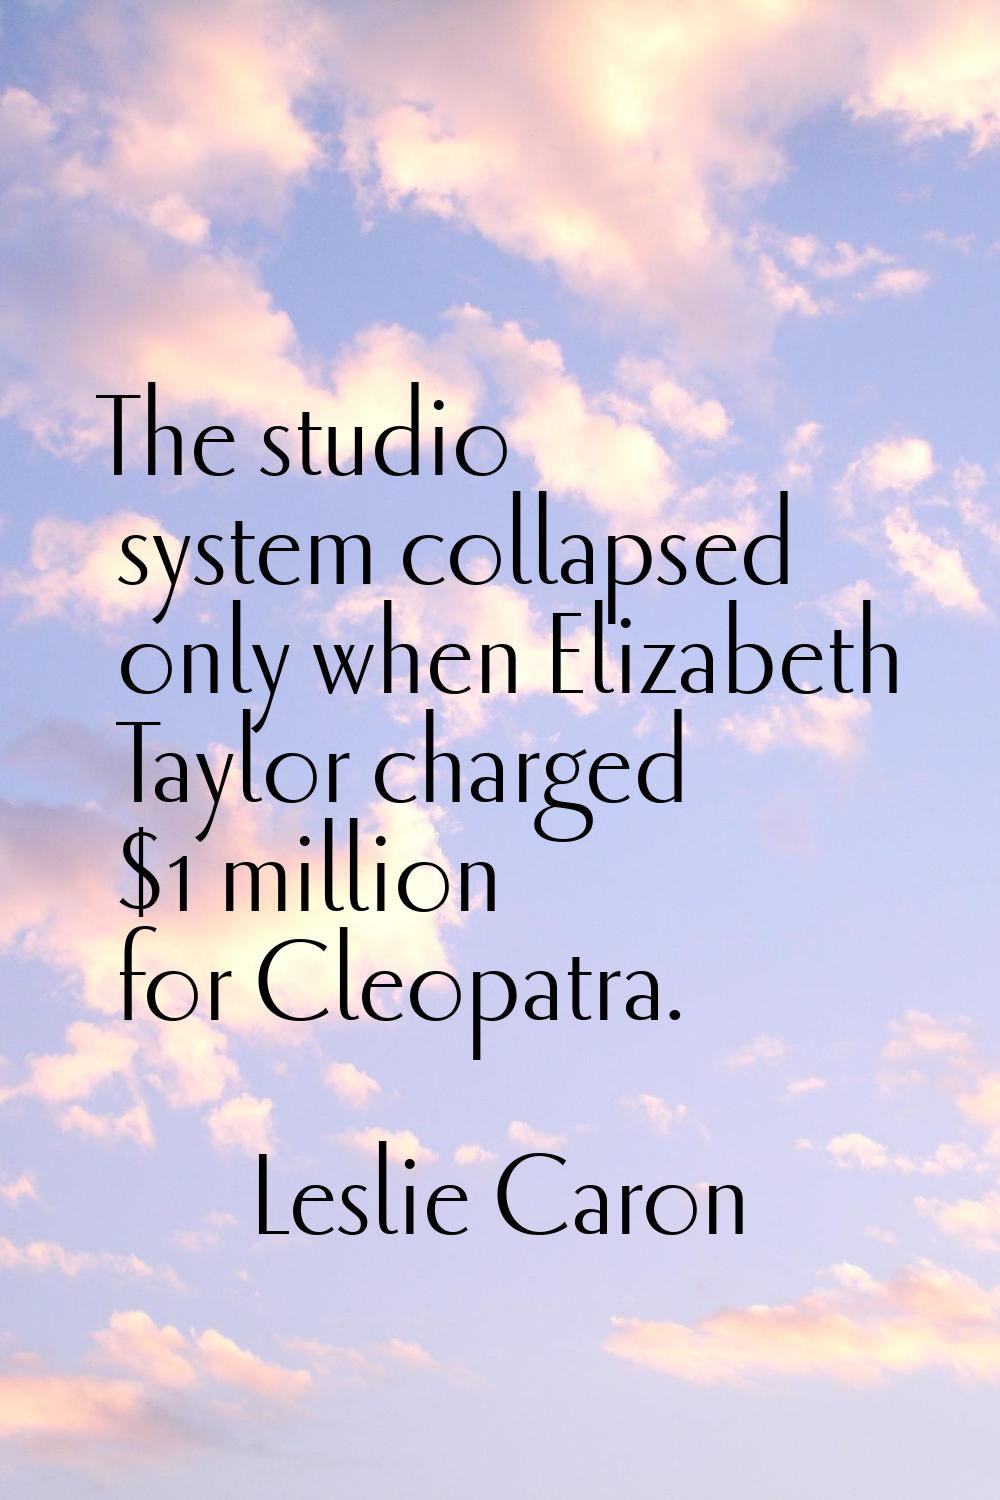 The studio system collapsed only when Elizabeth Taylor charged $1 million for Cleopatra.